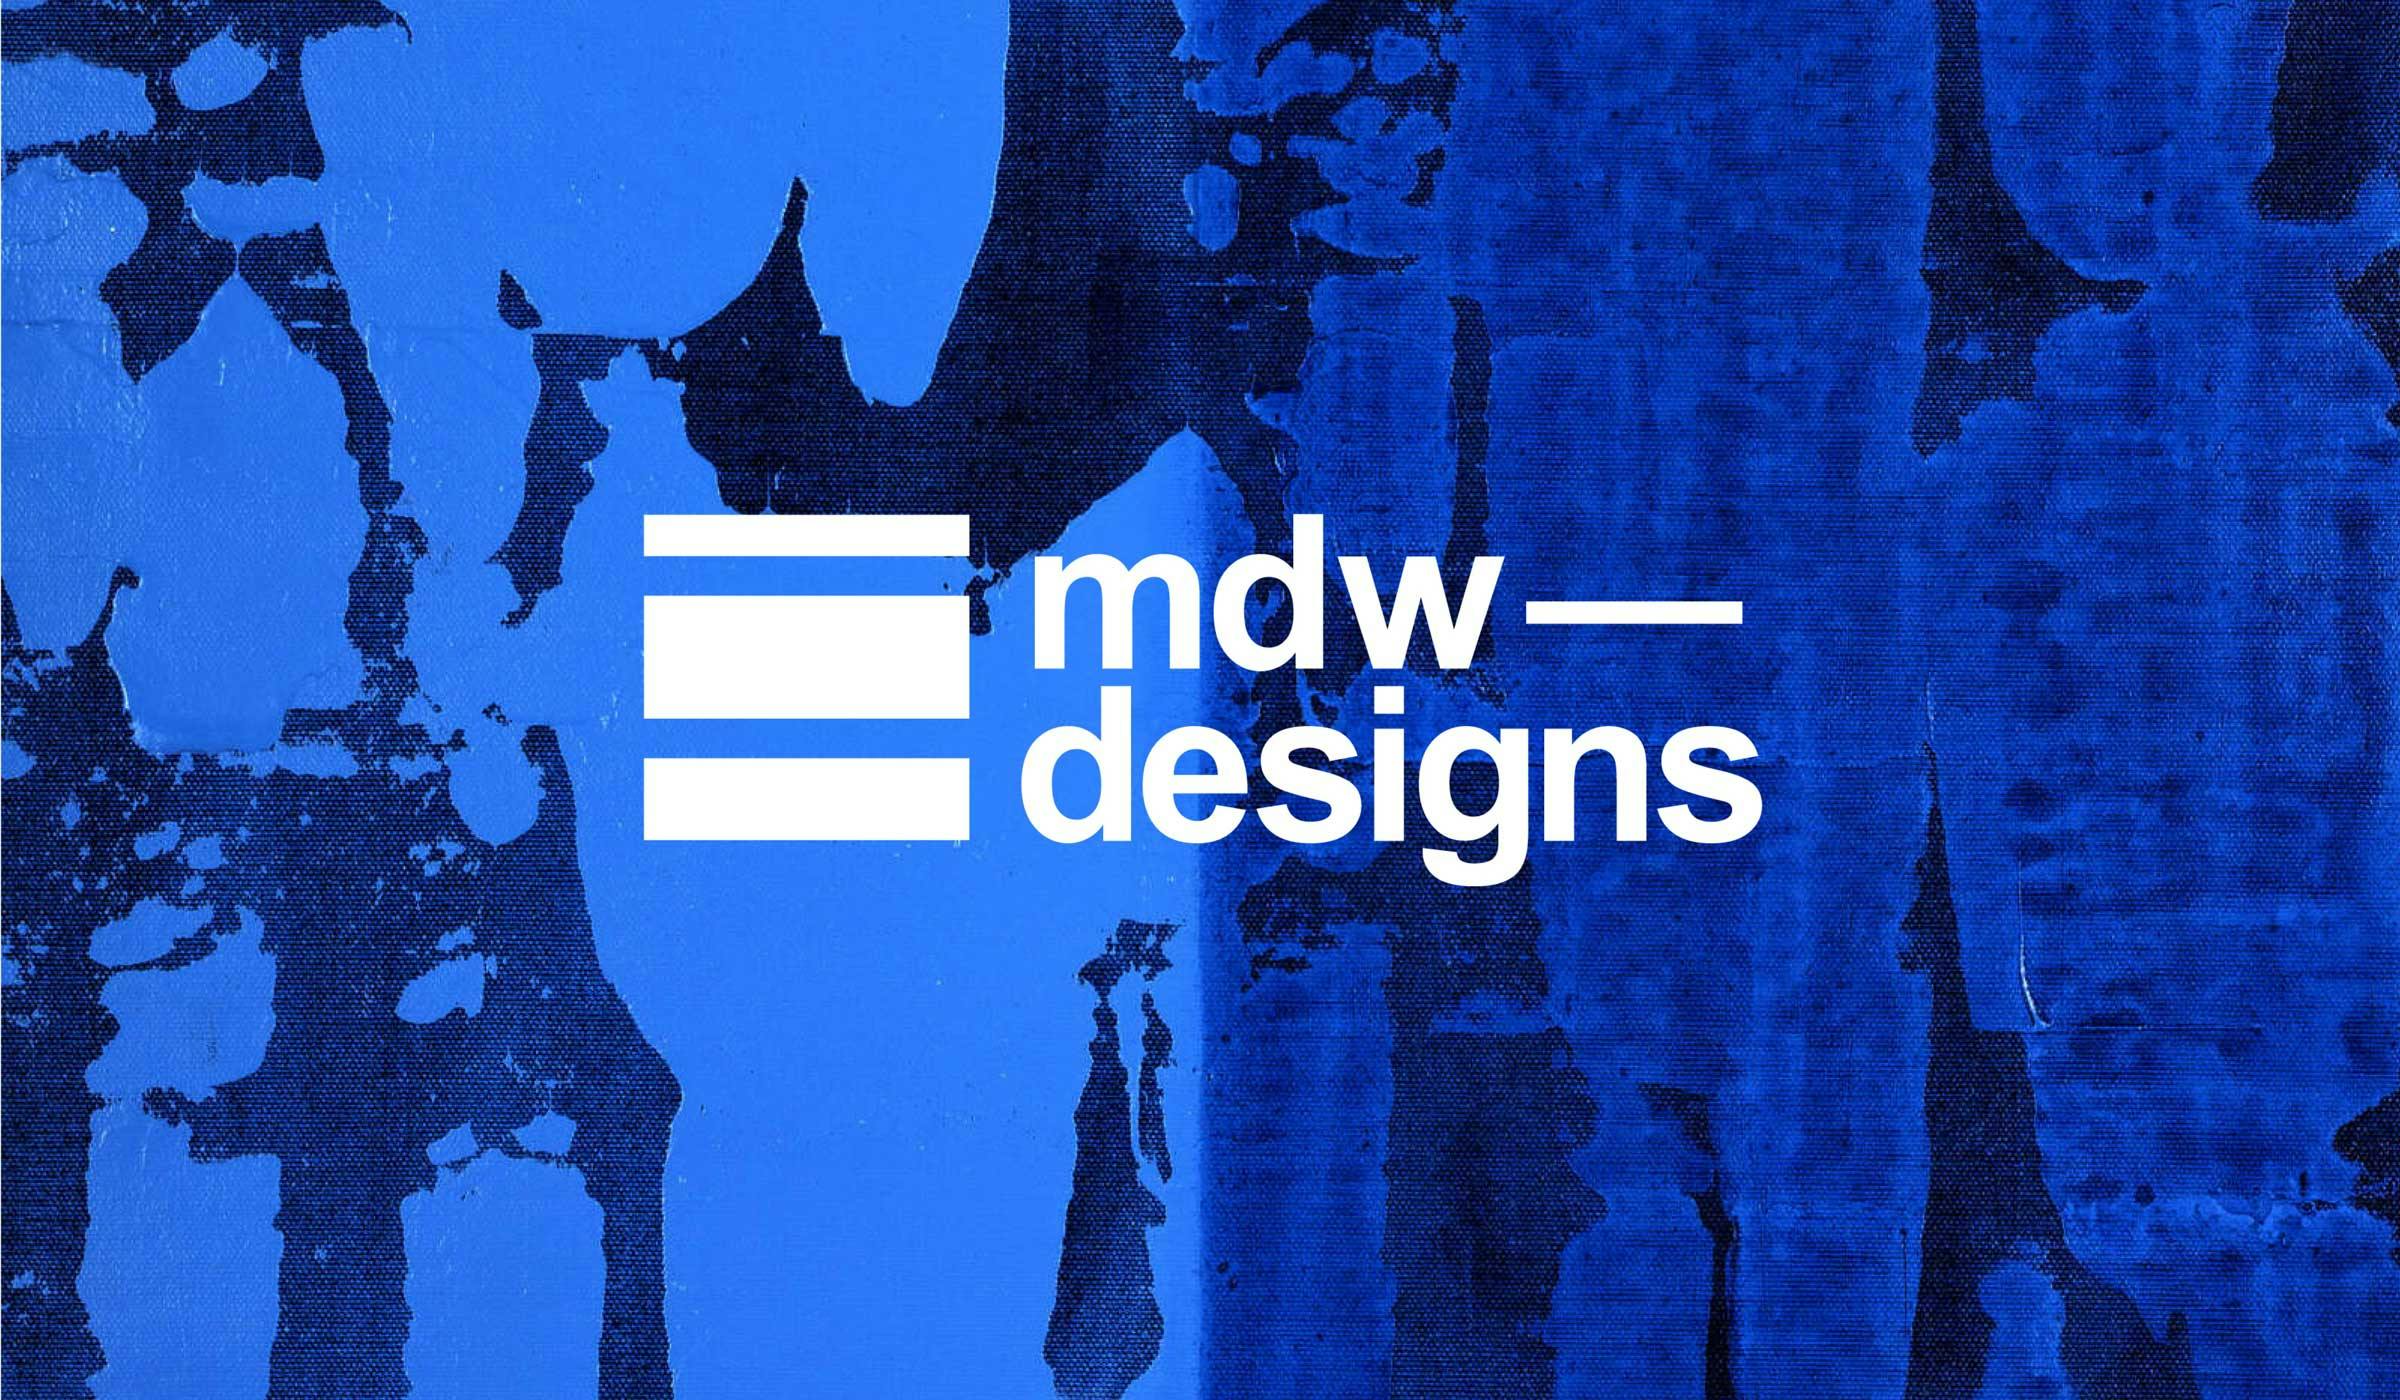 logo-for-MDW-designs-on-blue-canvas-painting.jpg